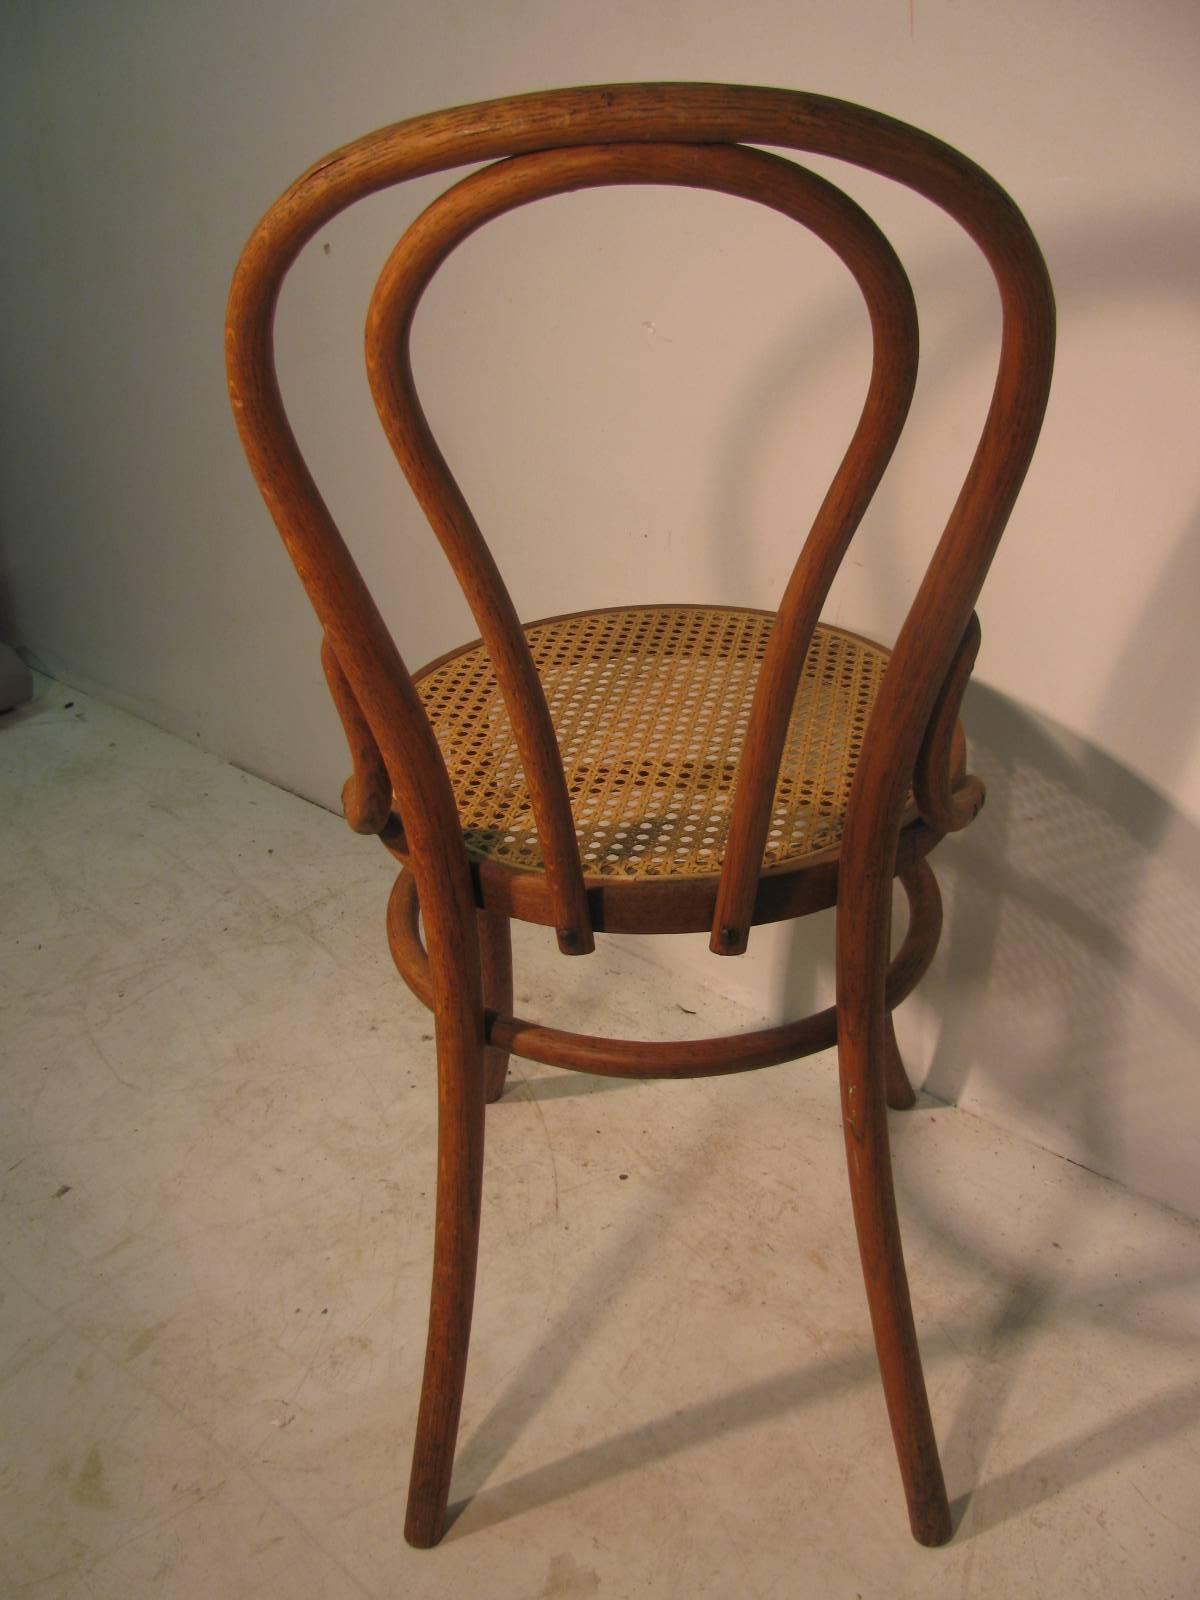 Pressed Twenty 19th Century Bent Wood Cafe Dining Chairs with Caned Seats